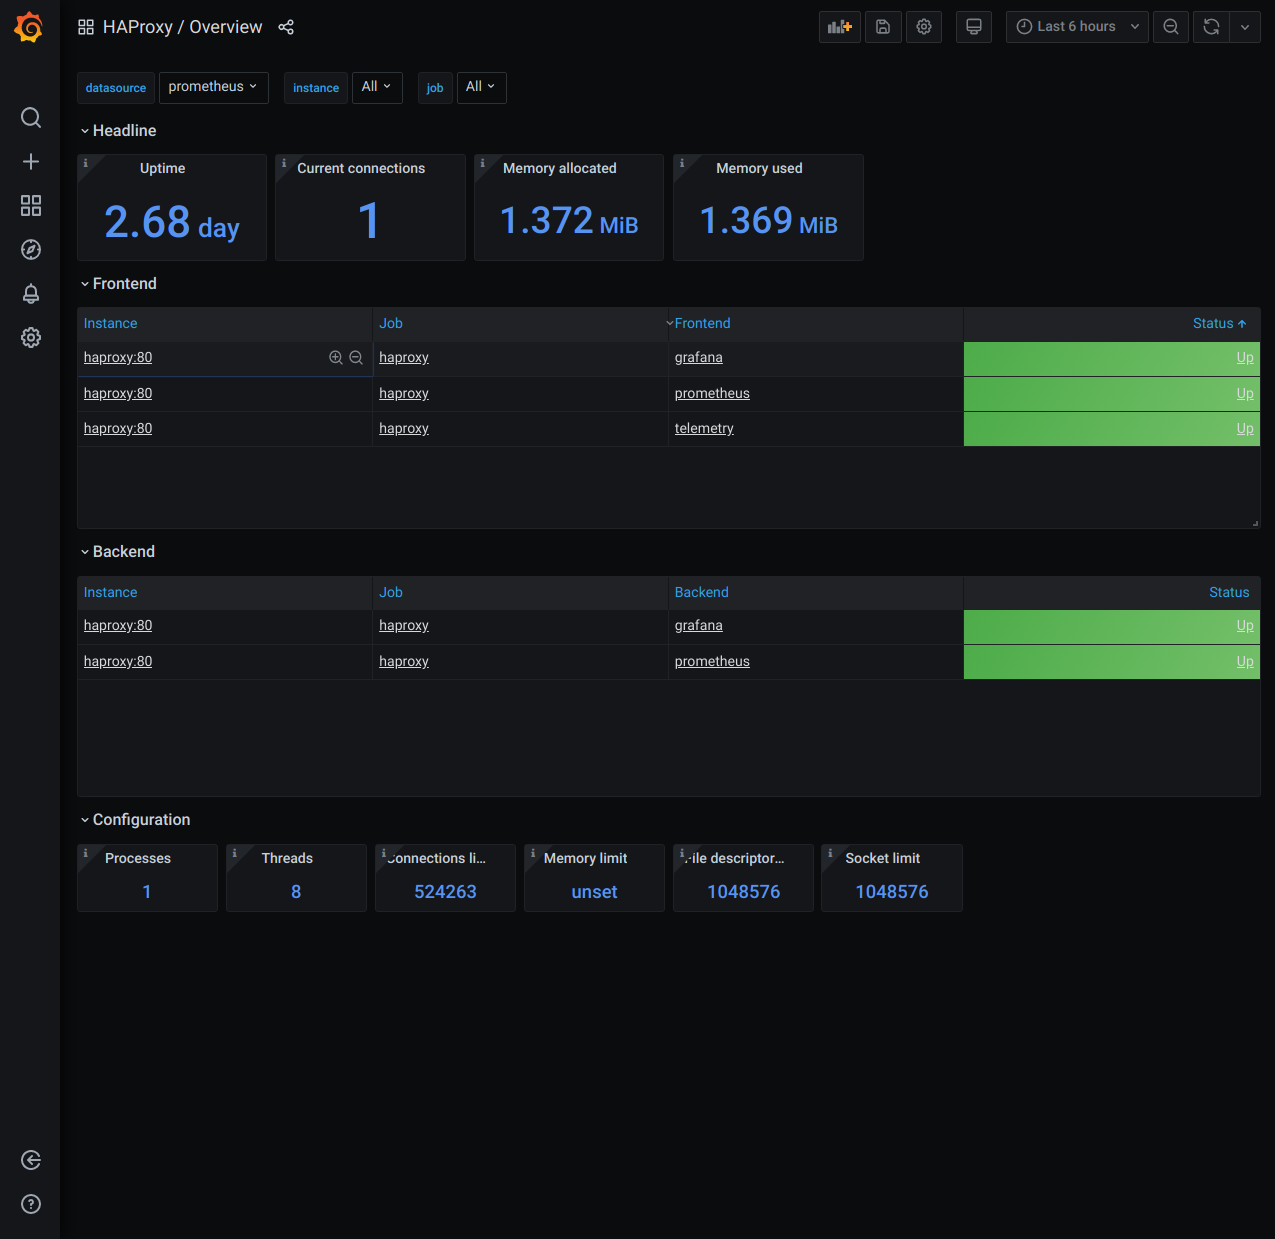 HAProxy / Overview dashboard